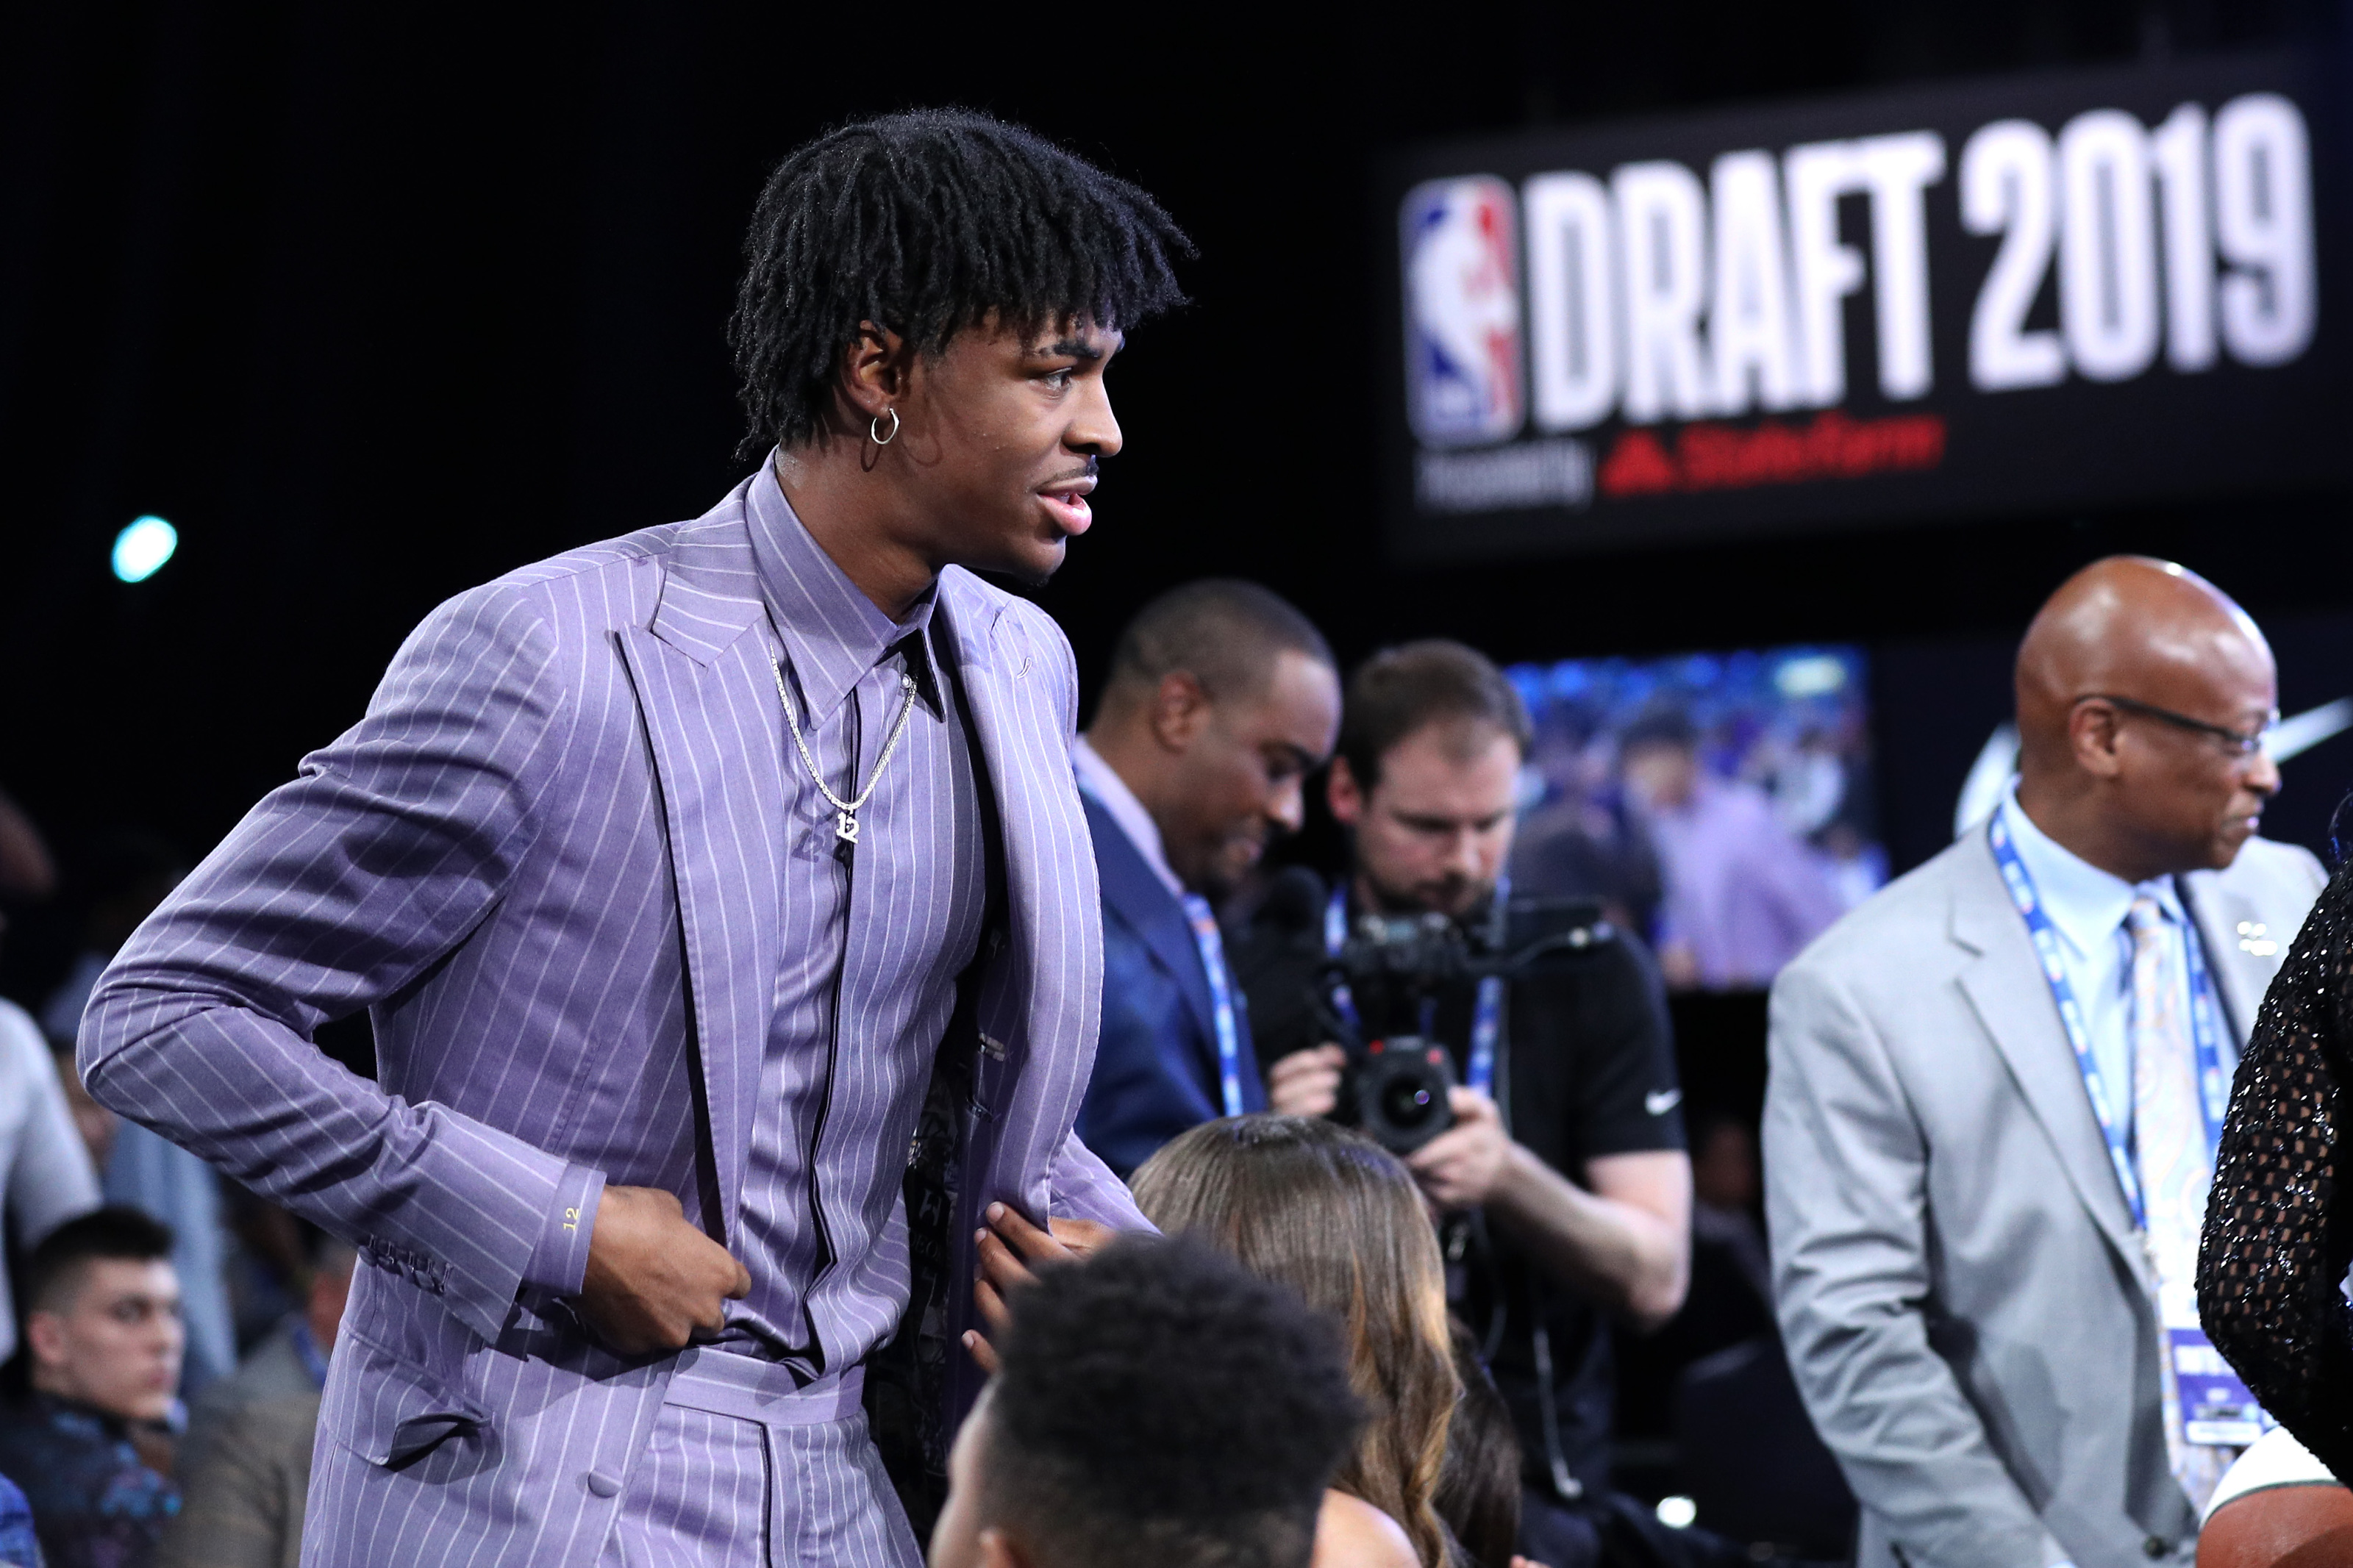 From being overshadowed on draft night to 2019-20 Rookie of the Year, Ja  Morant is just getting started